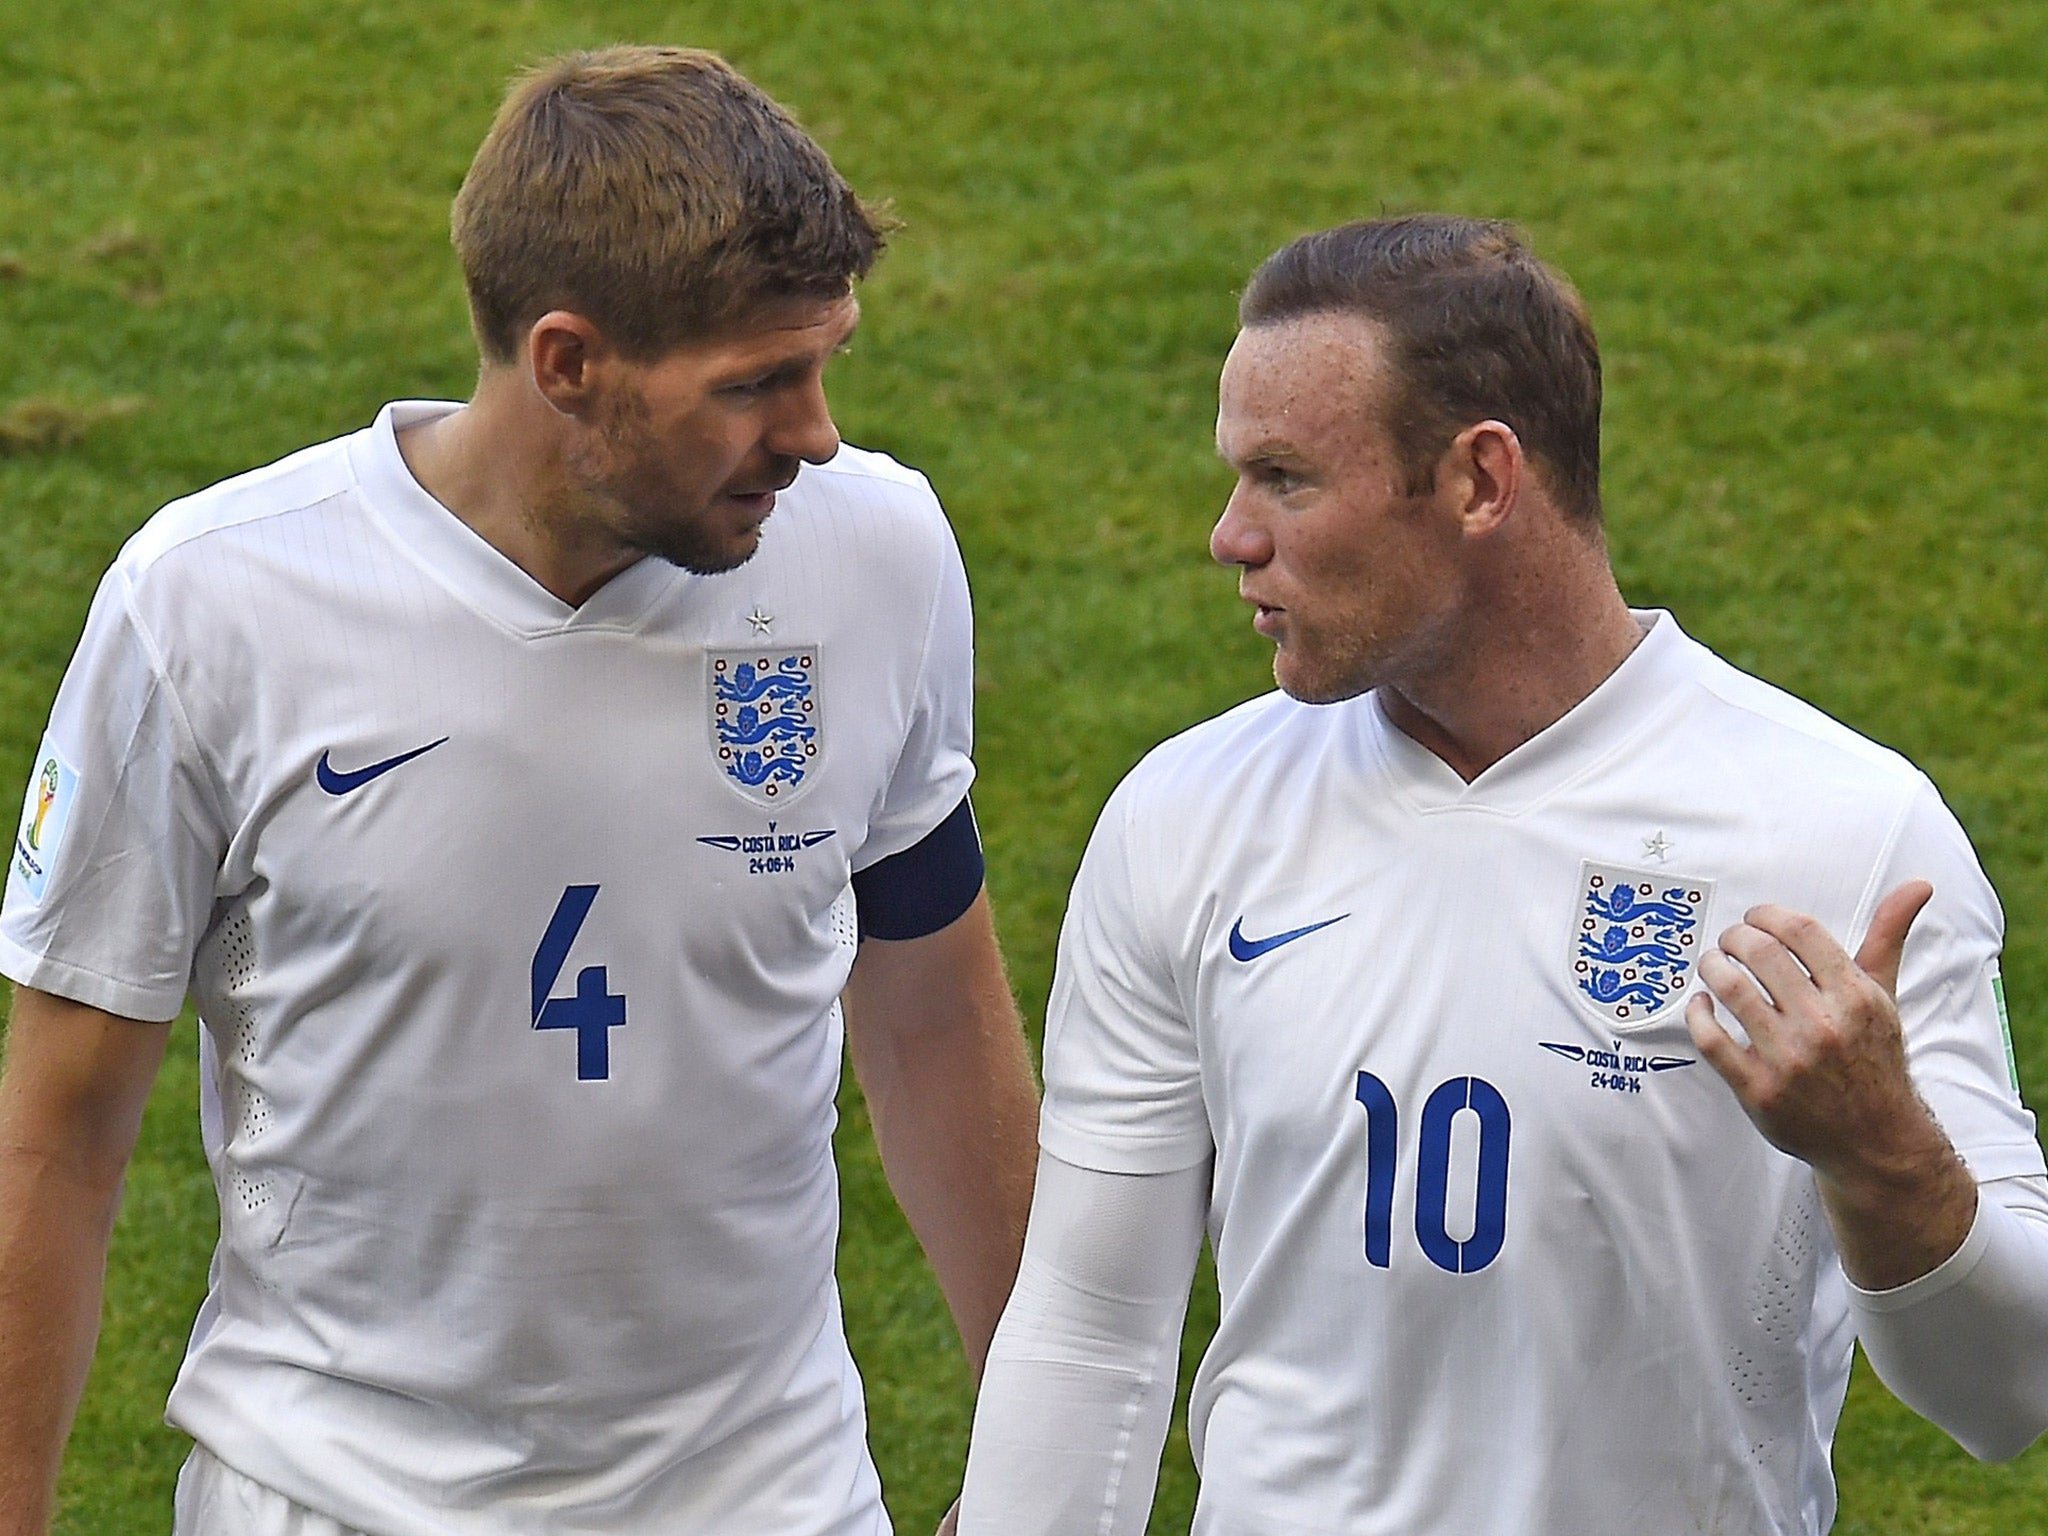 Wayne Rooney has been taking advice from the former England captain Steven Gerrard